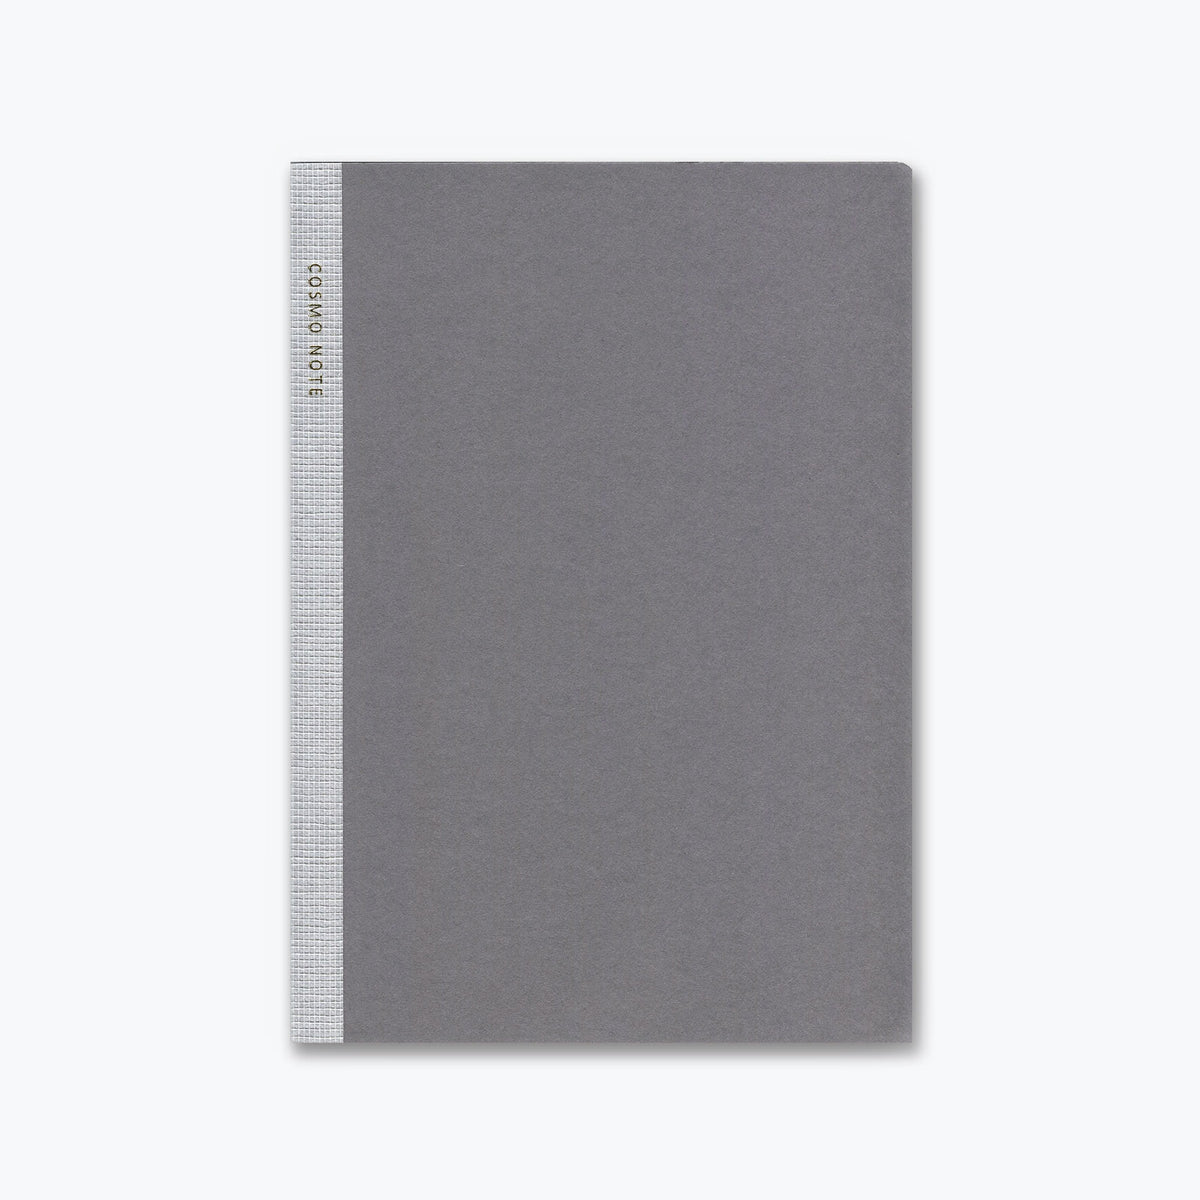 Yamamoto - Notebook - Cosmo Note - Air Light 83gsm